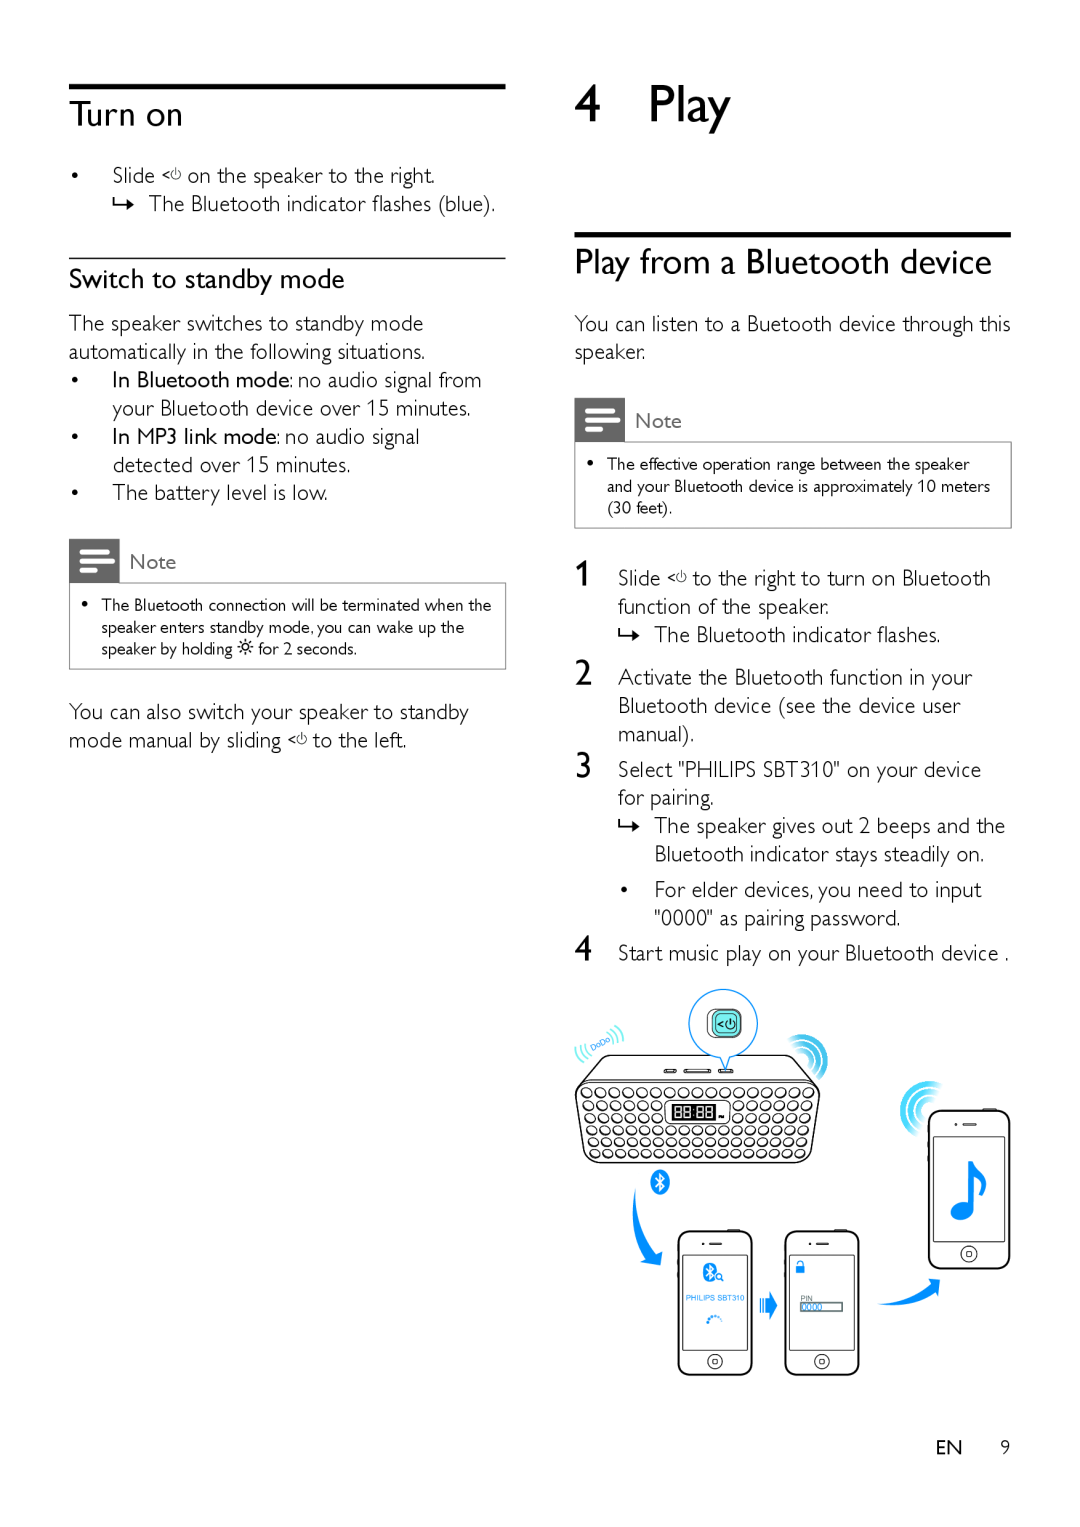 Philips SBT310/37, SBT37 user manual Turn on, Play from a Bluetooth device, Switch to standby mode 